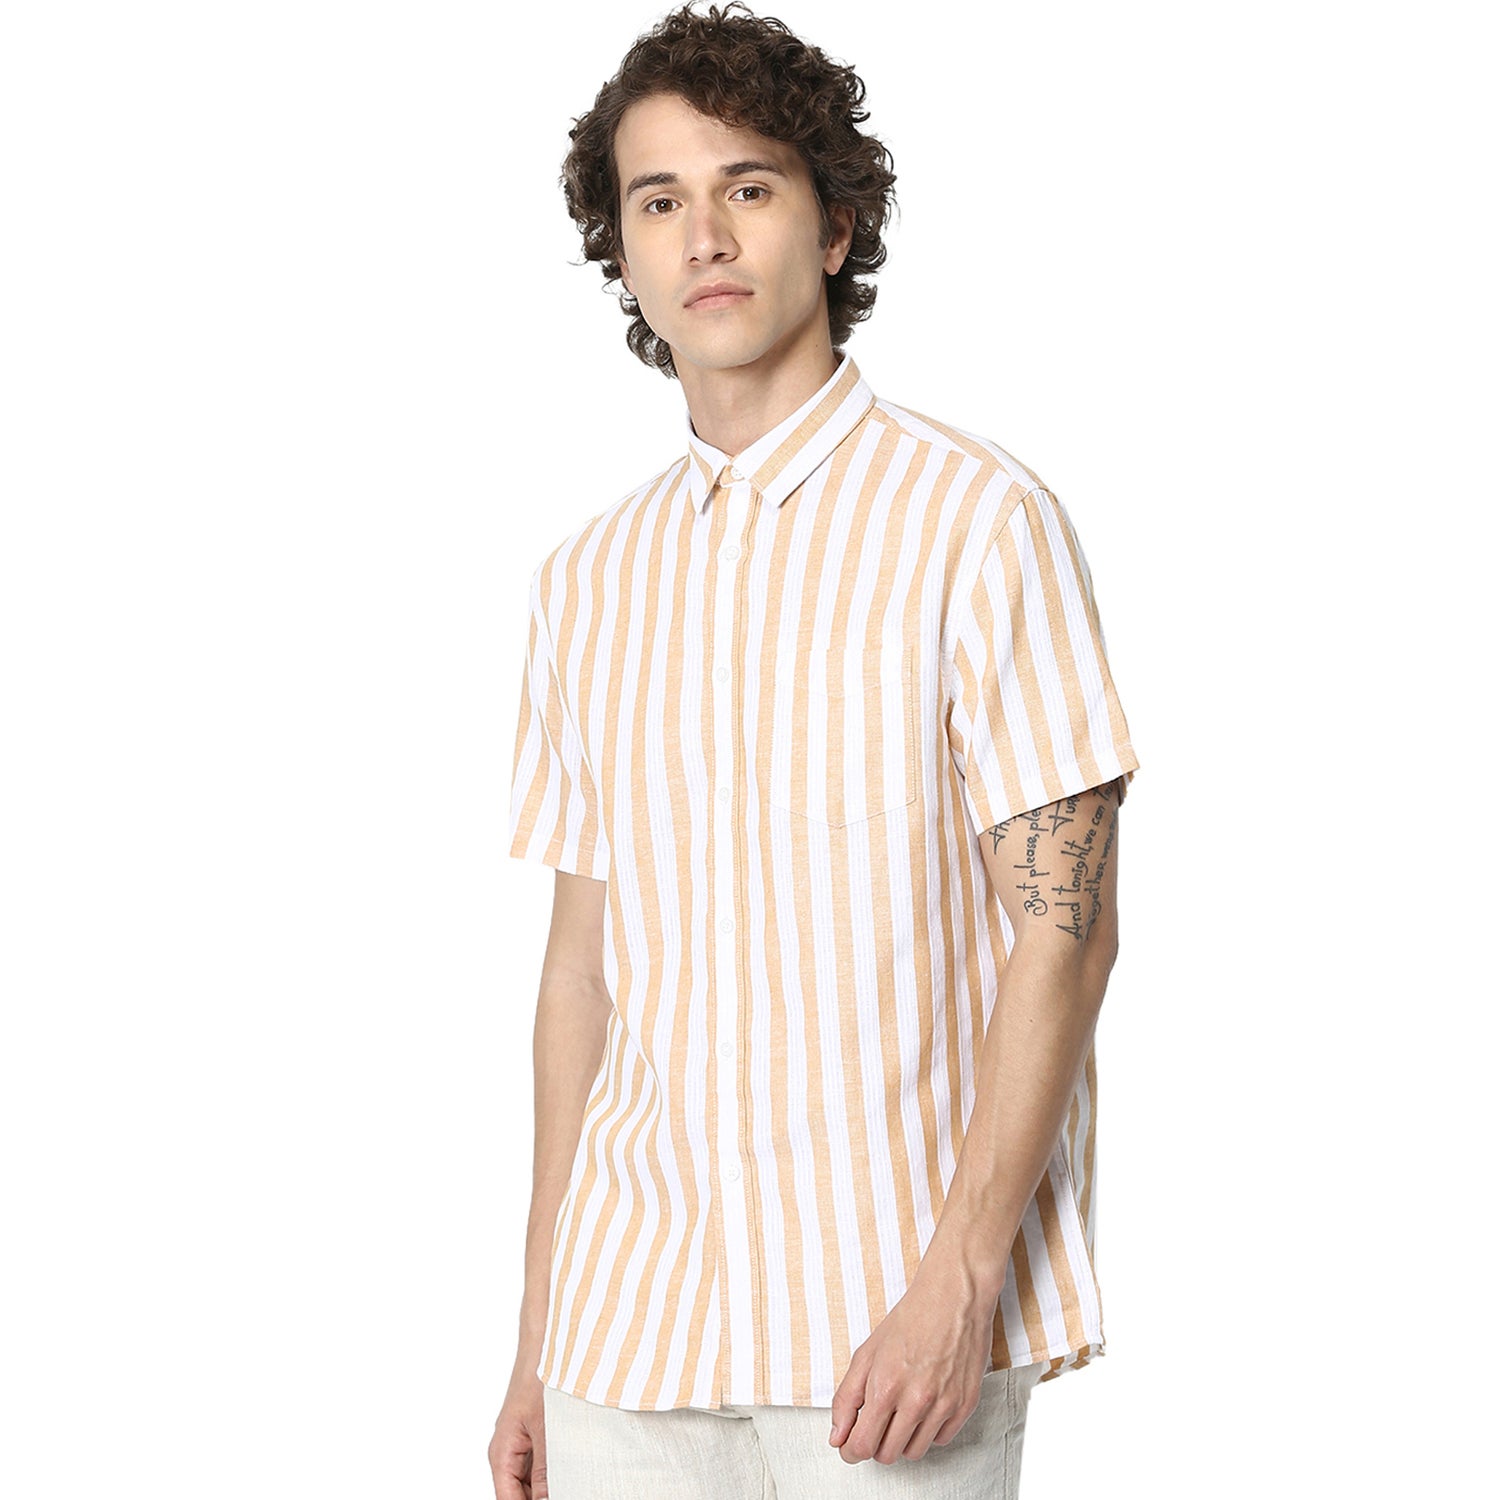 Beige and White Regular Fit Striped Casual Shirt (RABATONLINSS)